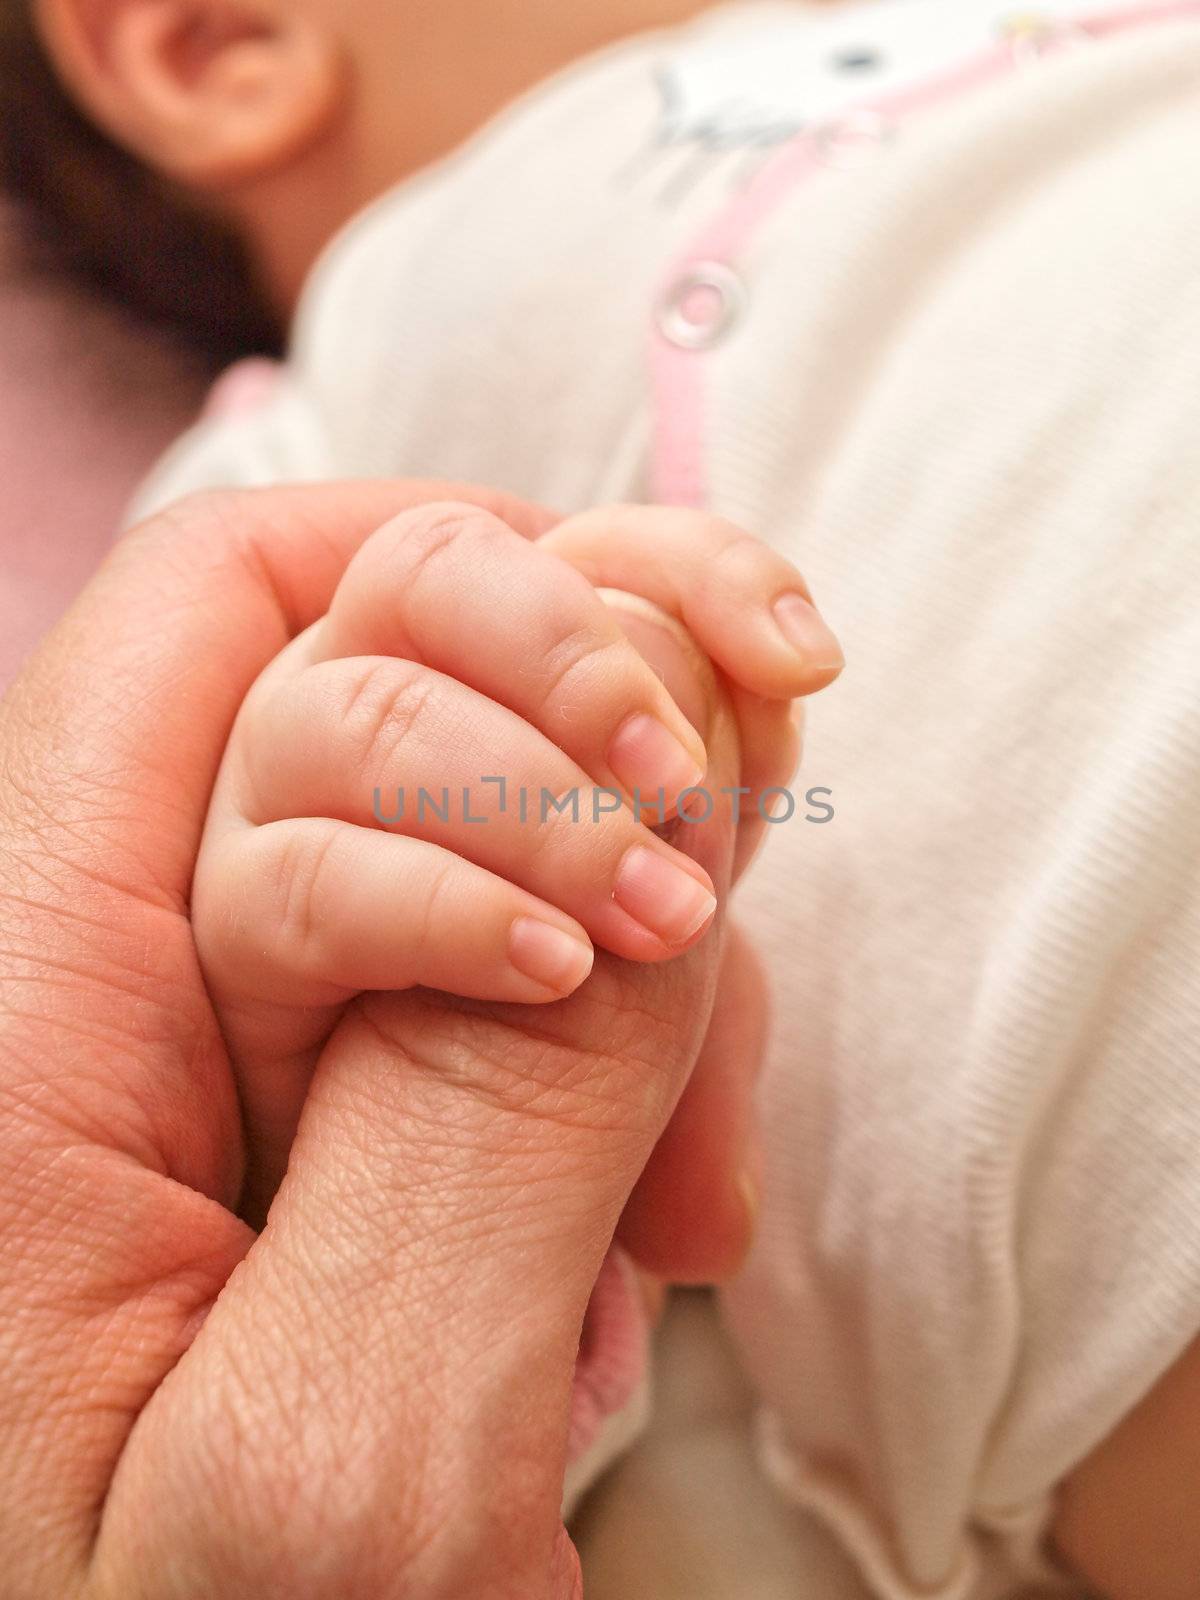 Parent holding an infants hand, small hand towards big